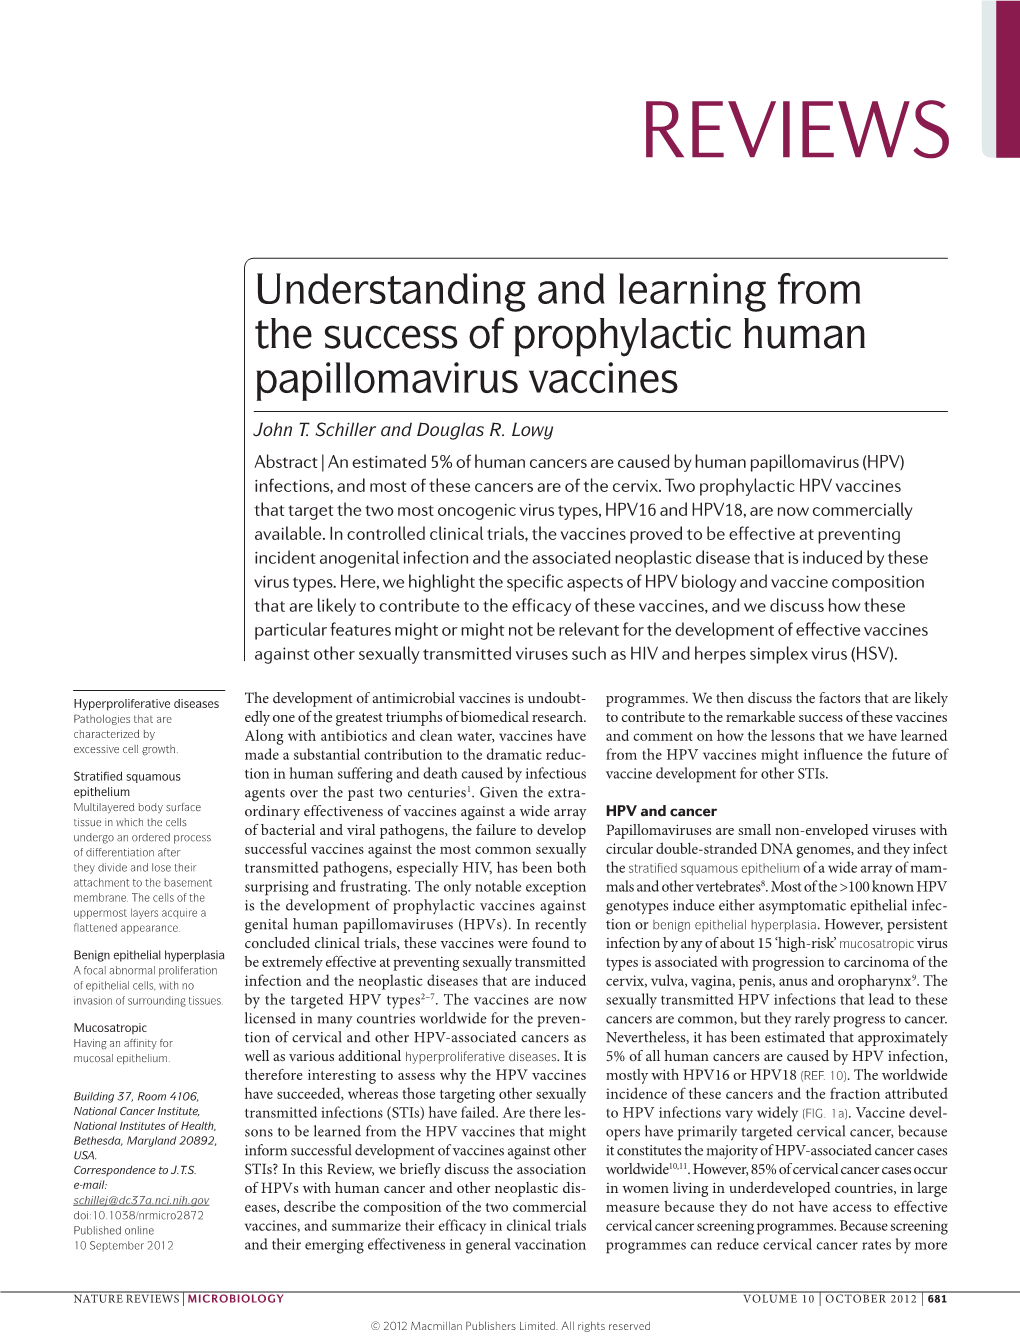 Understanding and Learning from the Success of Prophylactic Human Papillomavirus Vaccines